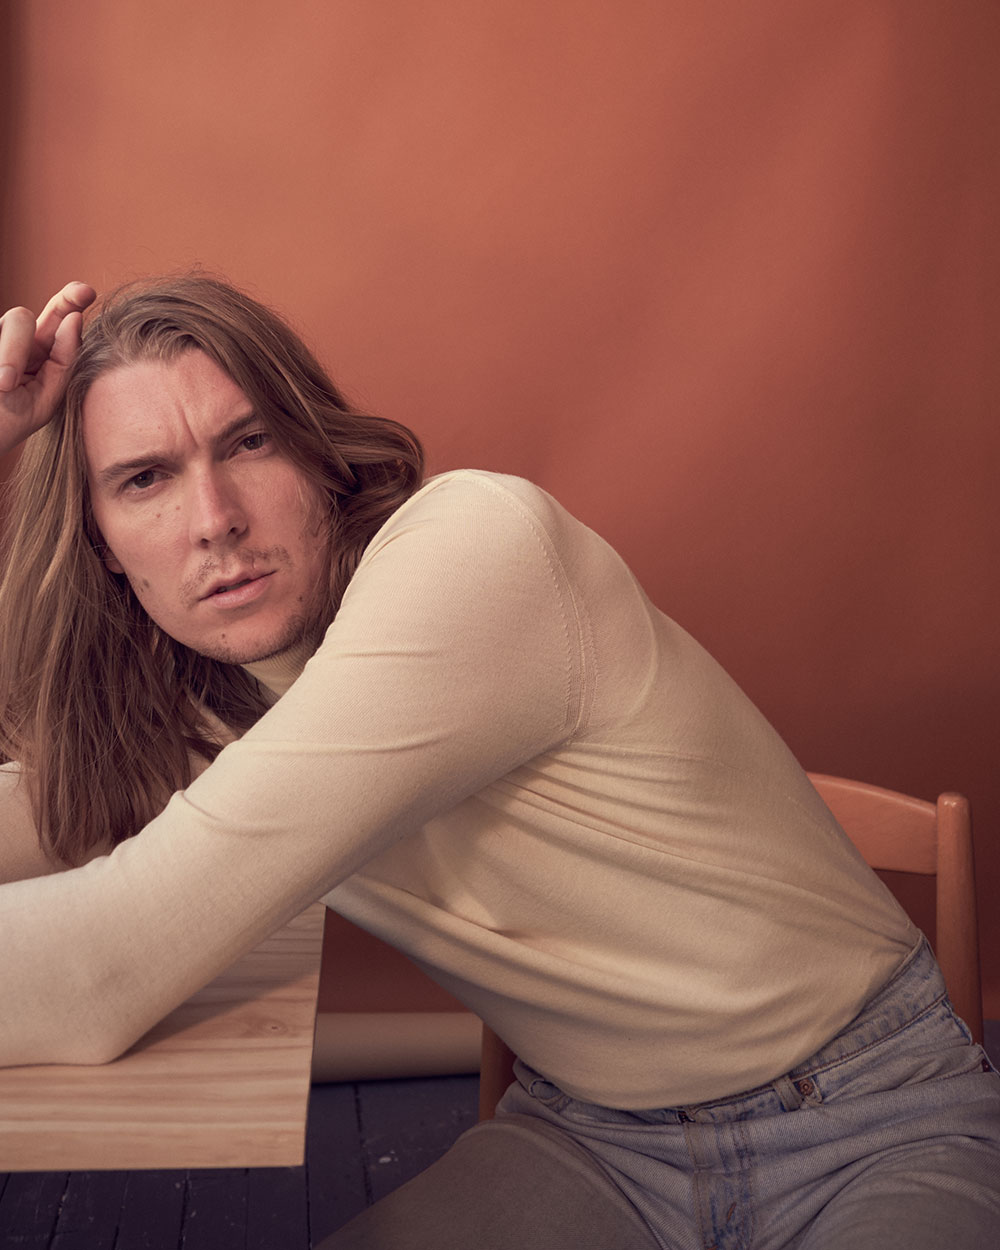 Colored photo of musician Alex Cameron by JackO’Connor for MONROWE Magazine